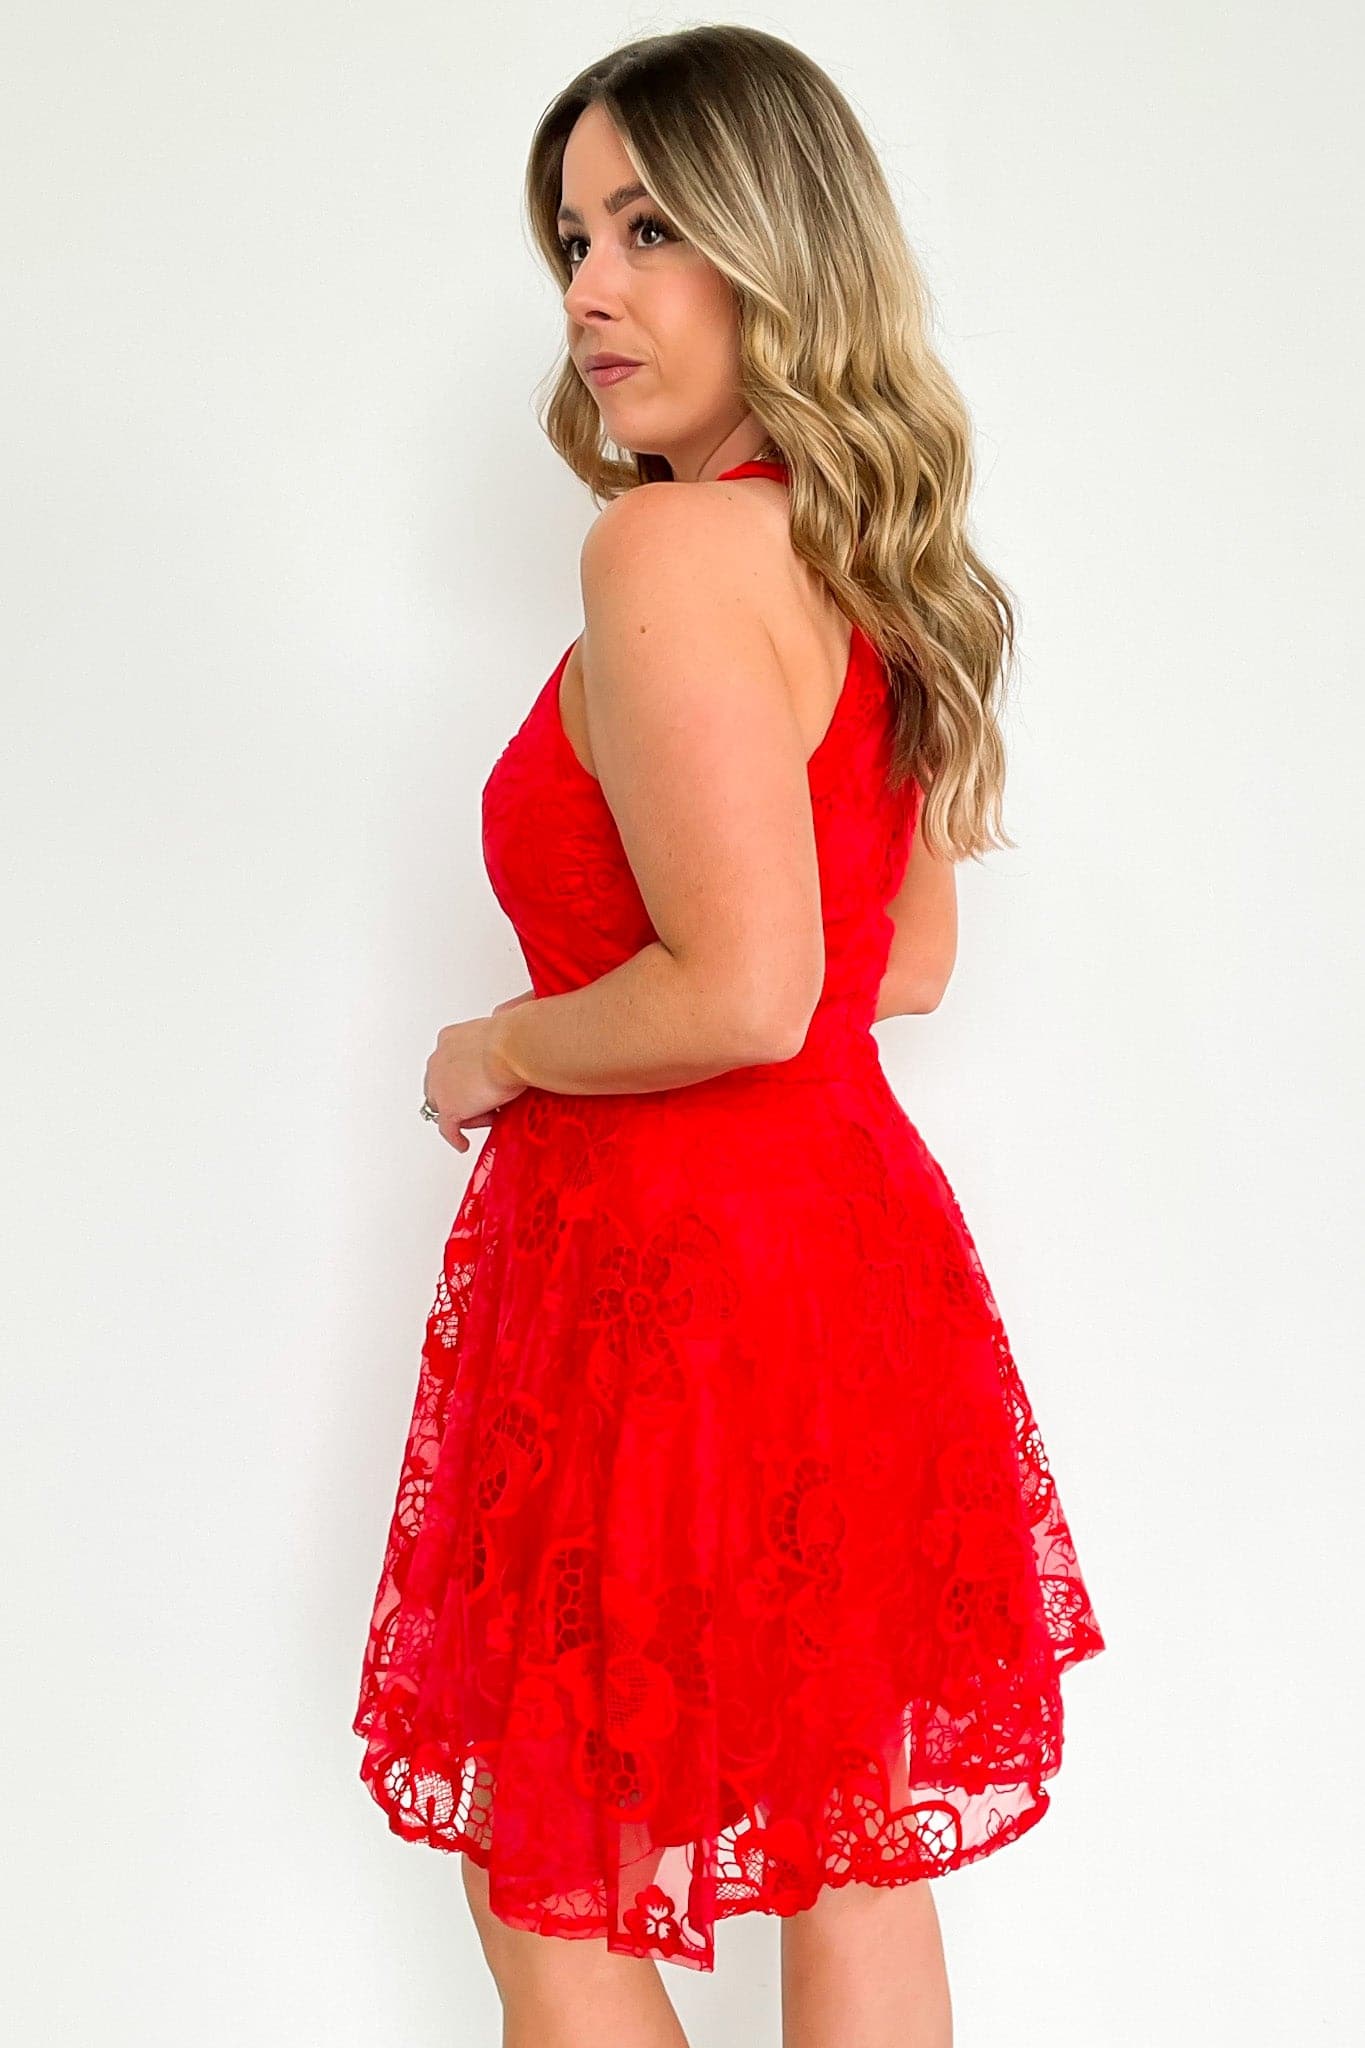  Darling Dancer Fit and Flare Lace Dress - FINAL SALE - Madison and Mallory